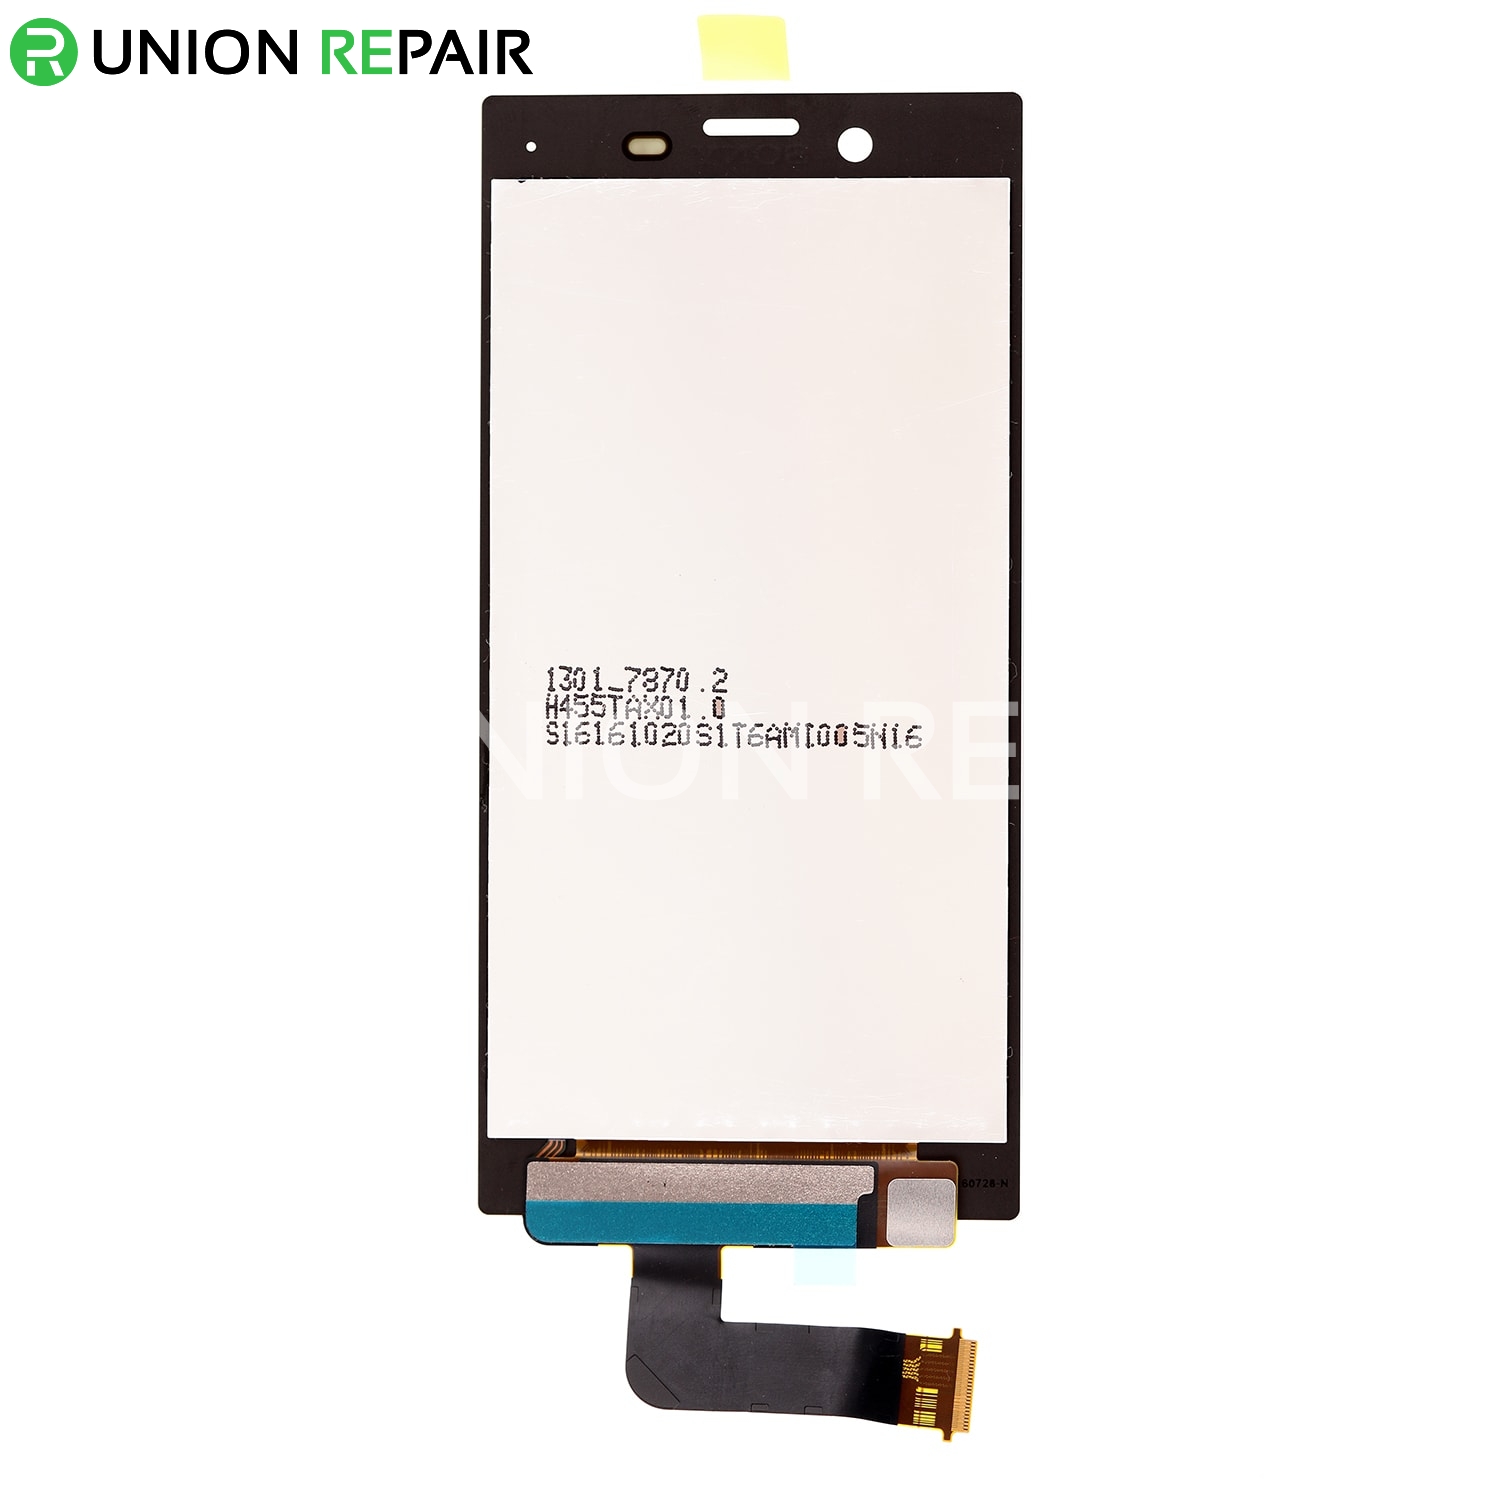 Replacement for Sony Xperia X Compact/Mini LCD Screen with Digitizer Assembly - Blue